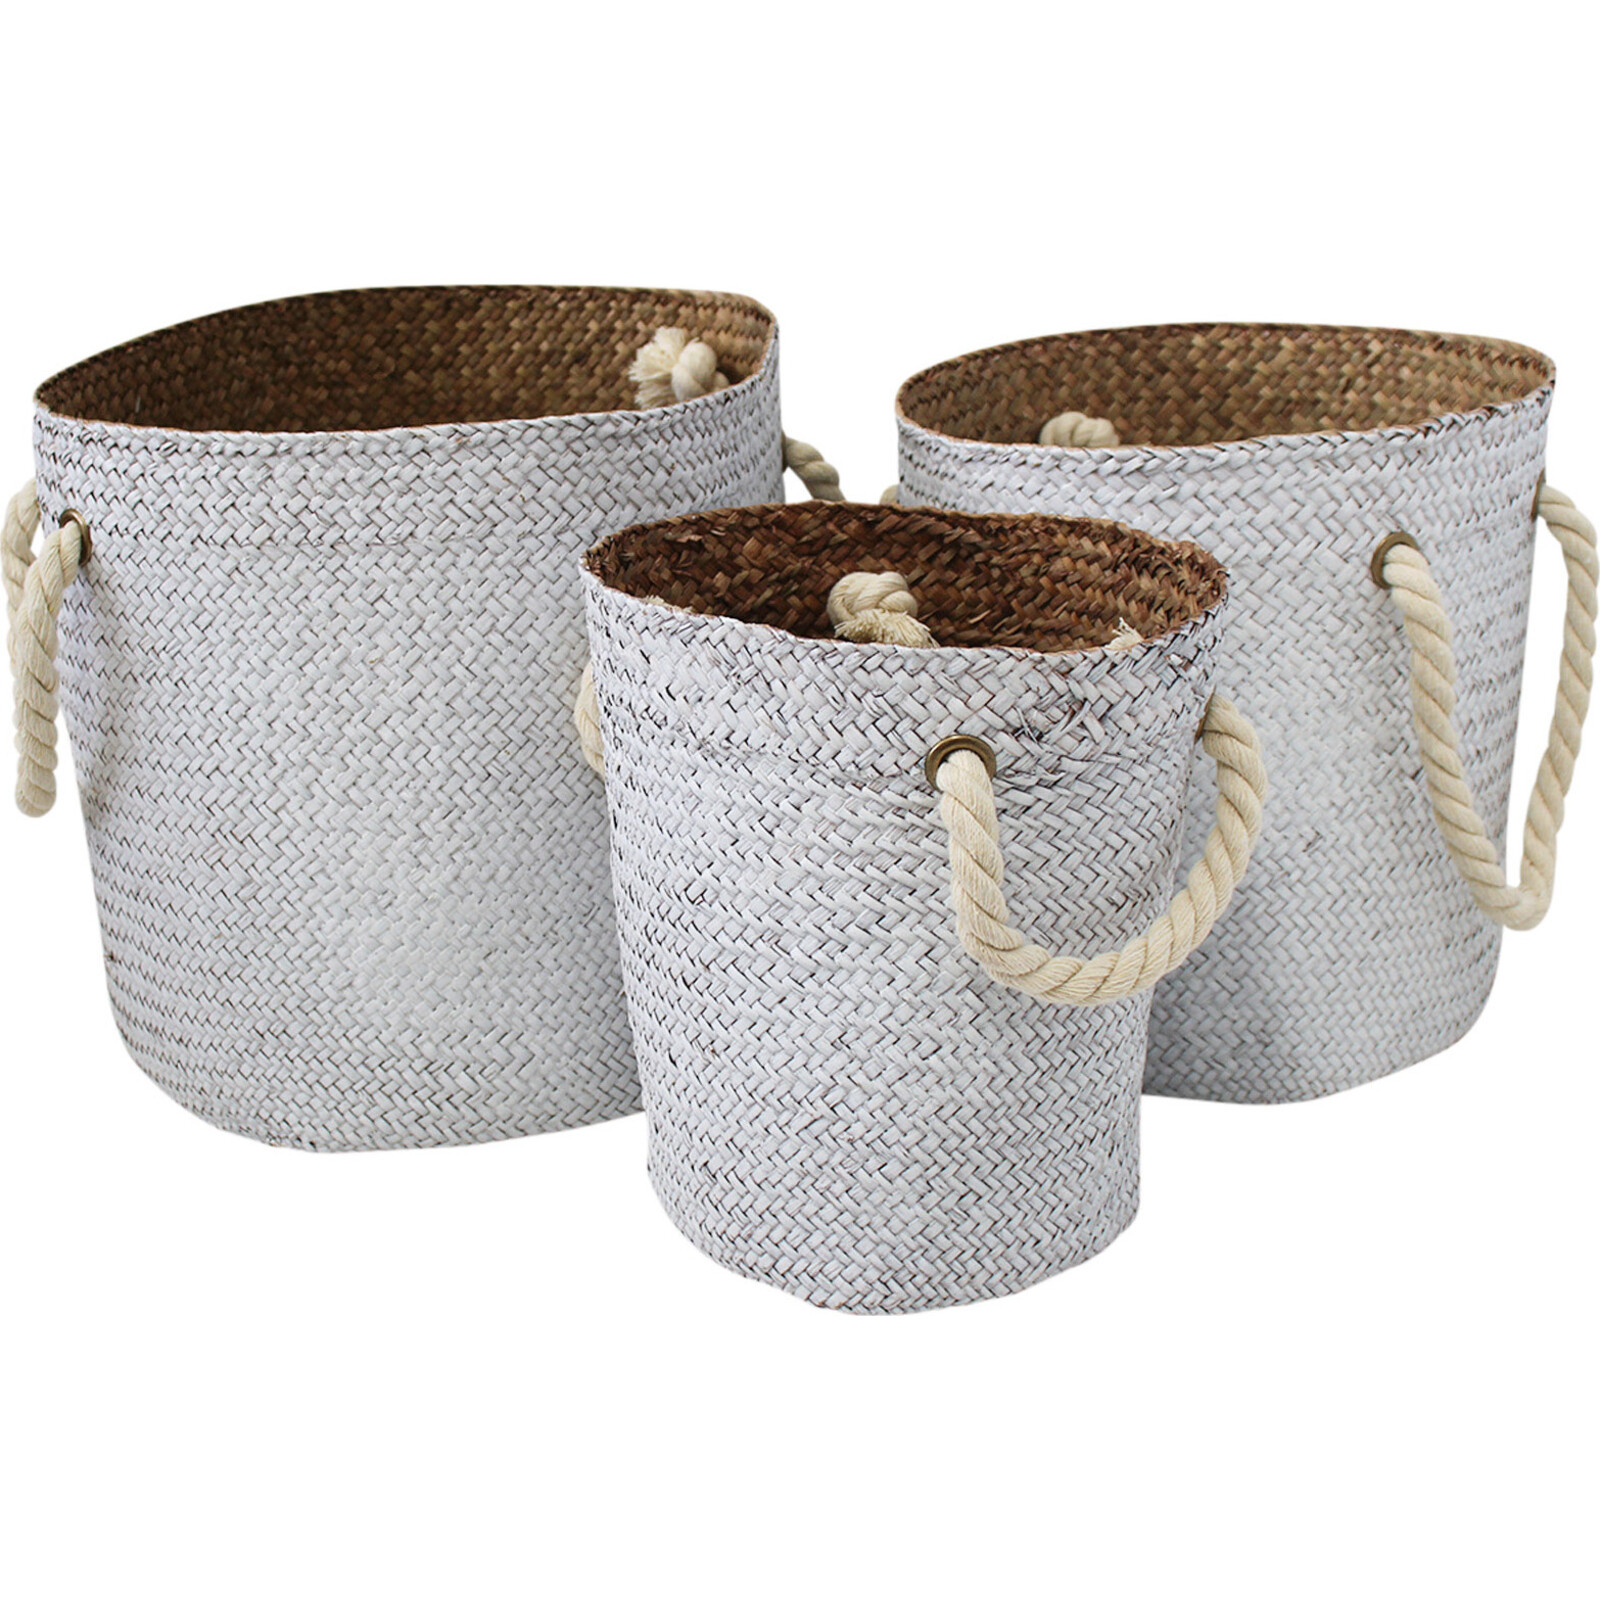 Woven Tubs S/3 Rope HandleWhite/Nat